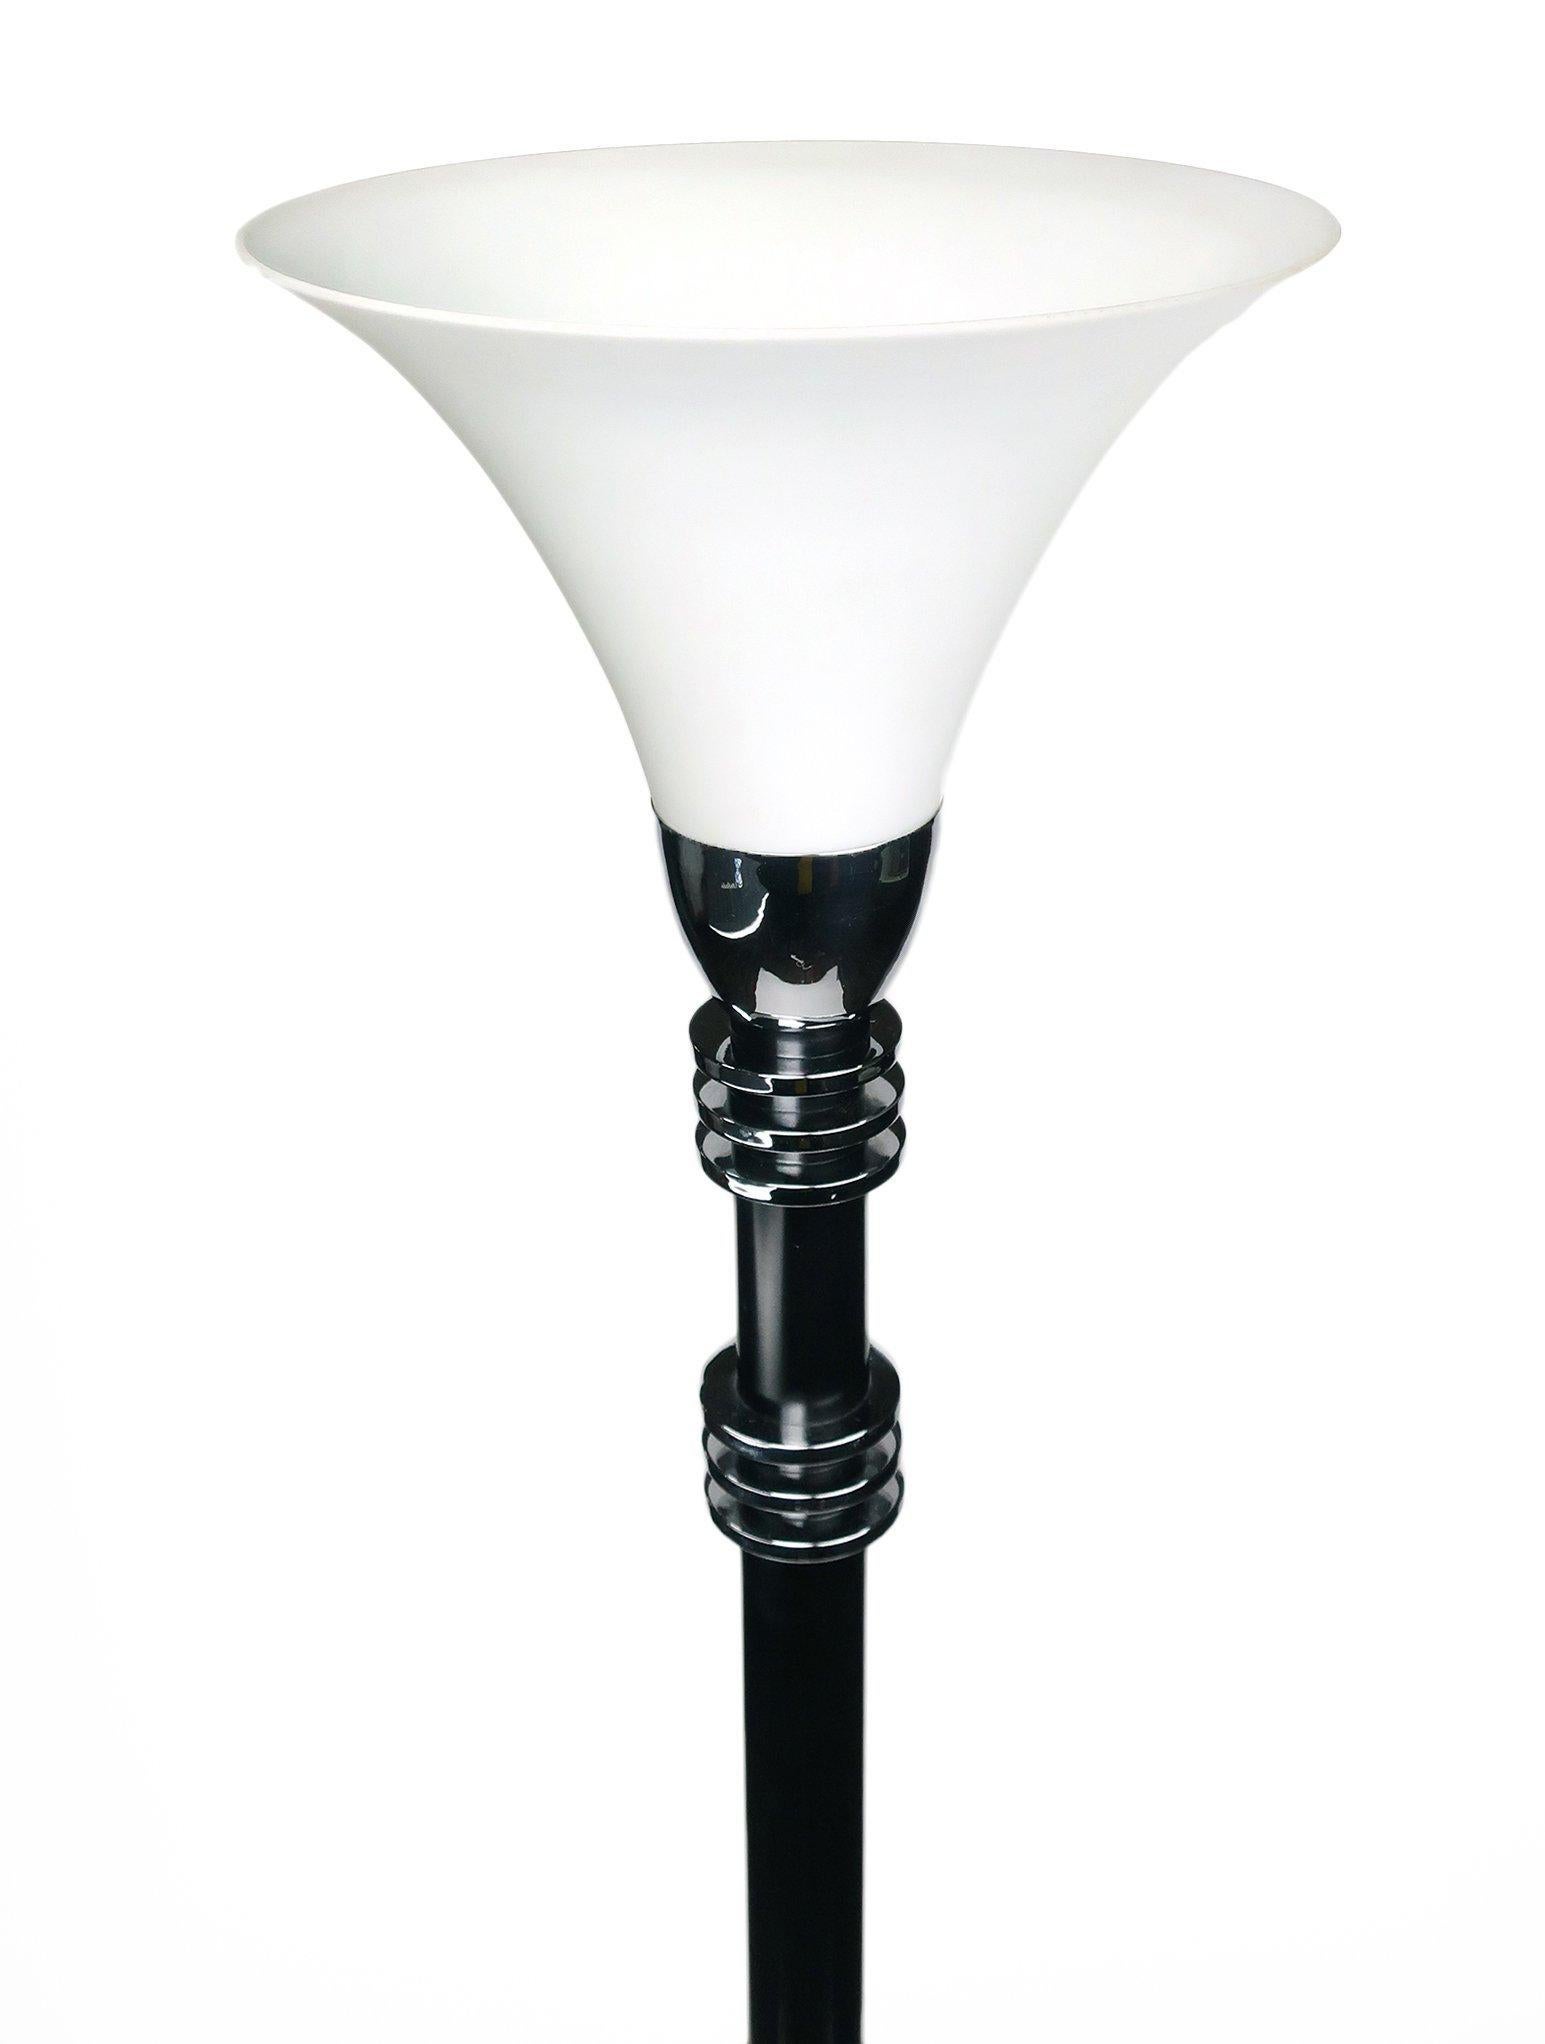 A stunning Jay Spectre designed floor lamp/torchiere for the Paul Hanson lighting company. With a chrome base and accents, black metal stem and white frosted glass shade that evokes streamlined Art Deco and Machine Age design, this torchiere is the